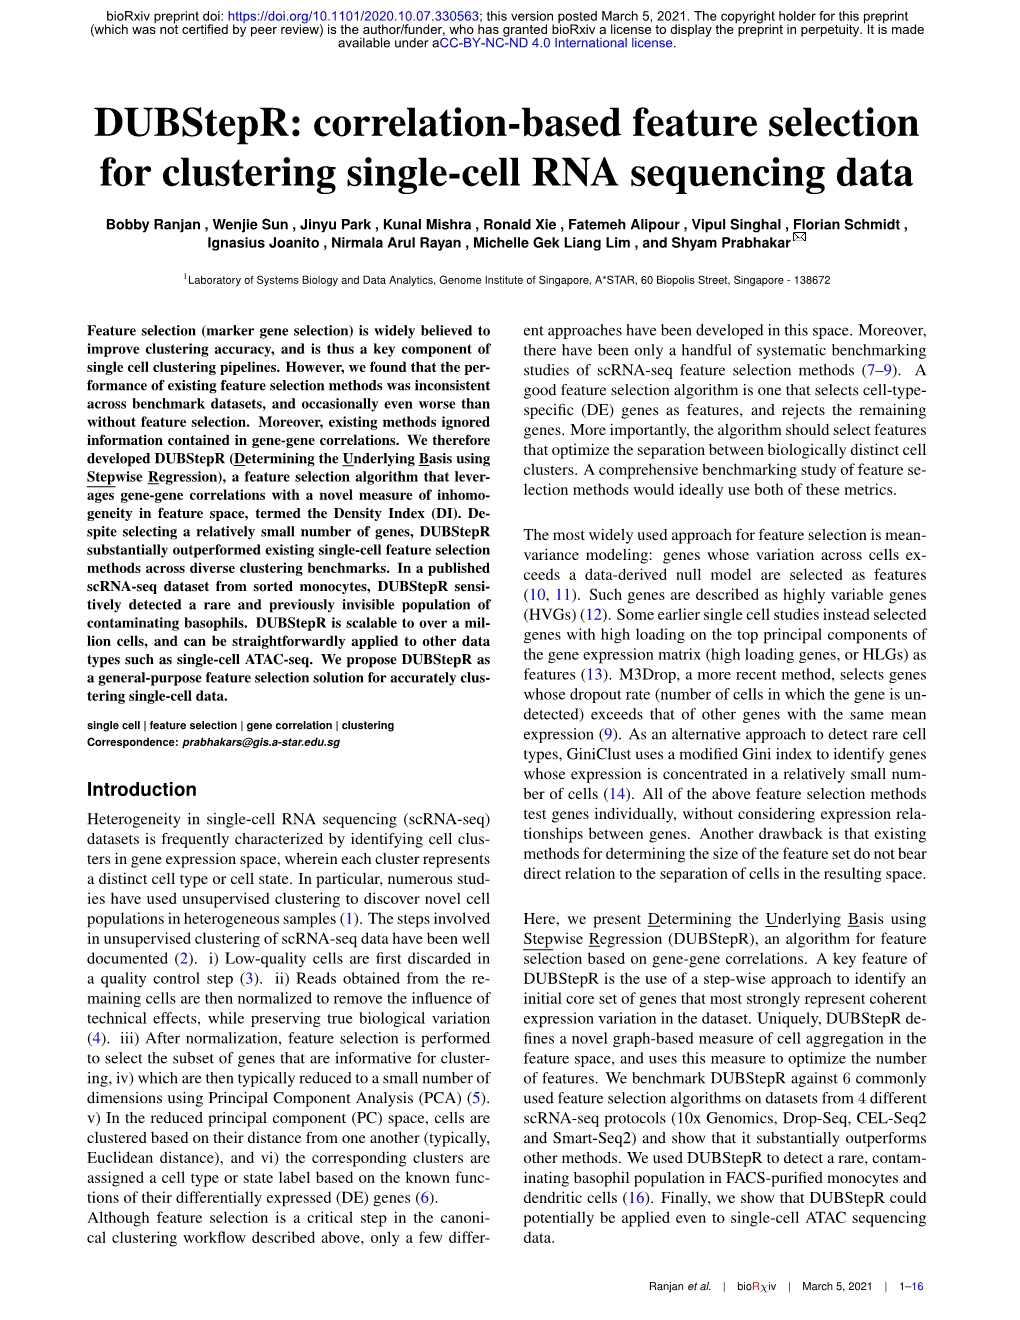 Correlation-Based Feature Selection for Clustering Single-Cell RNA Sequencing Data